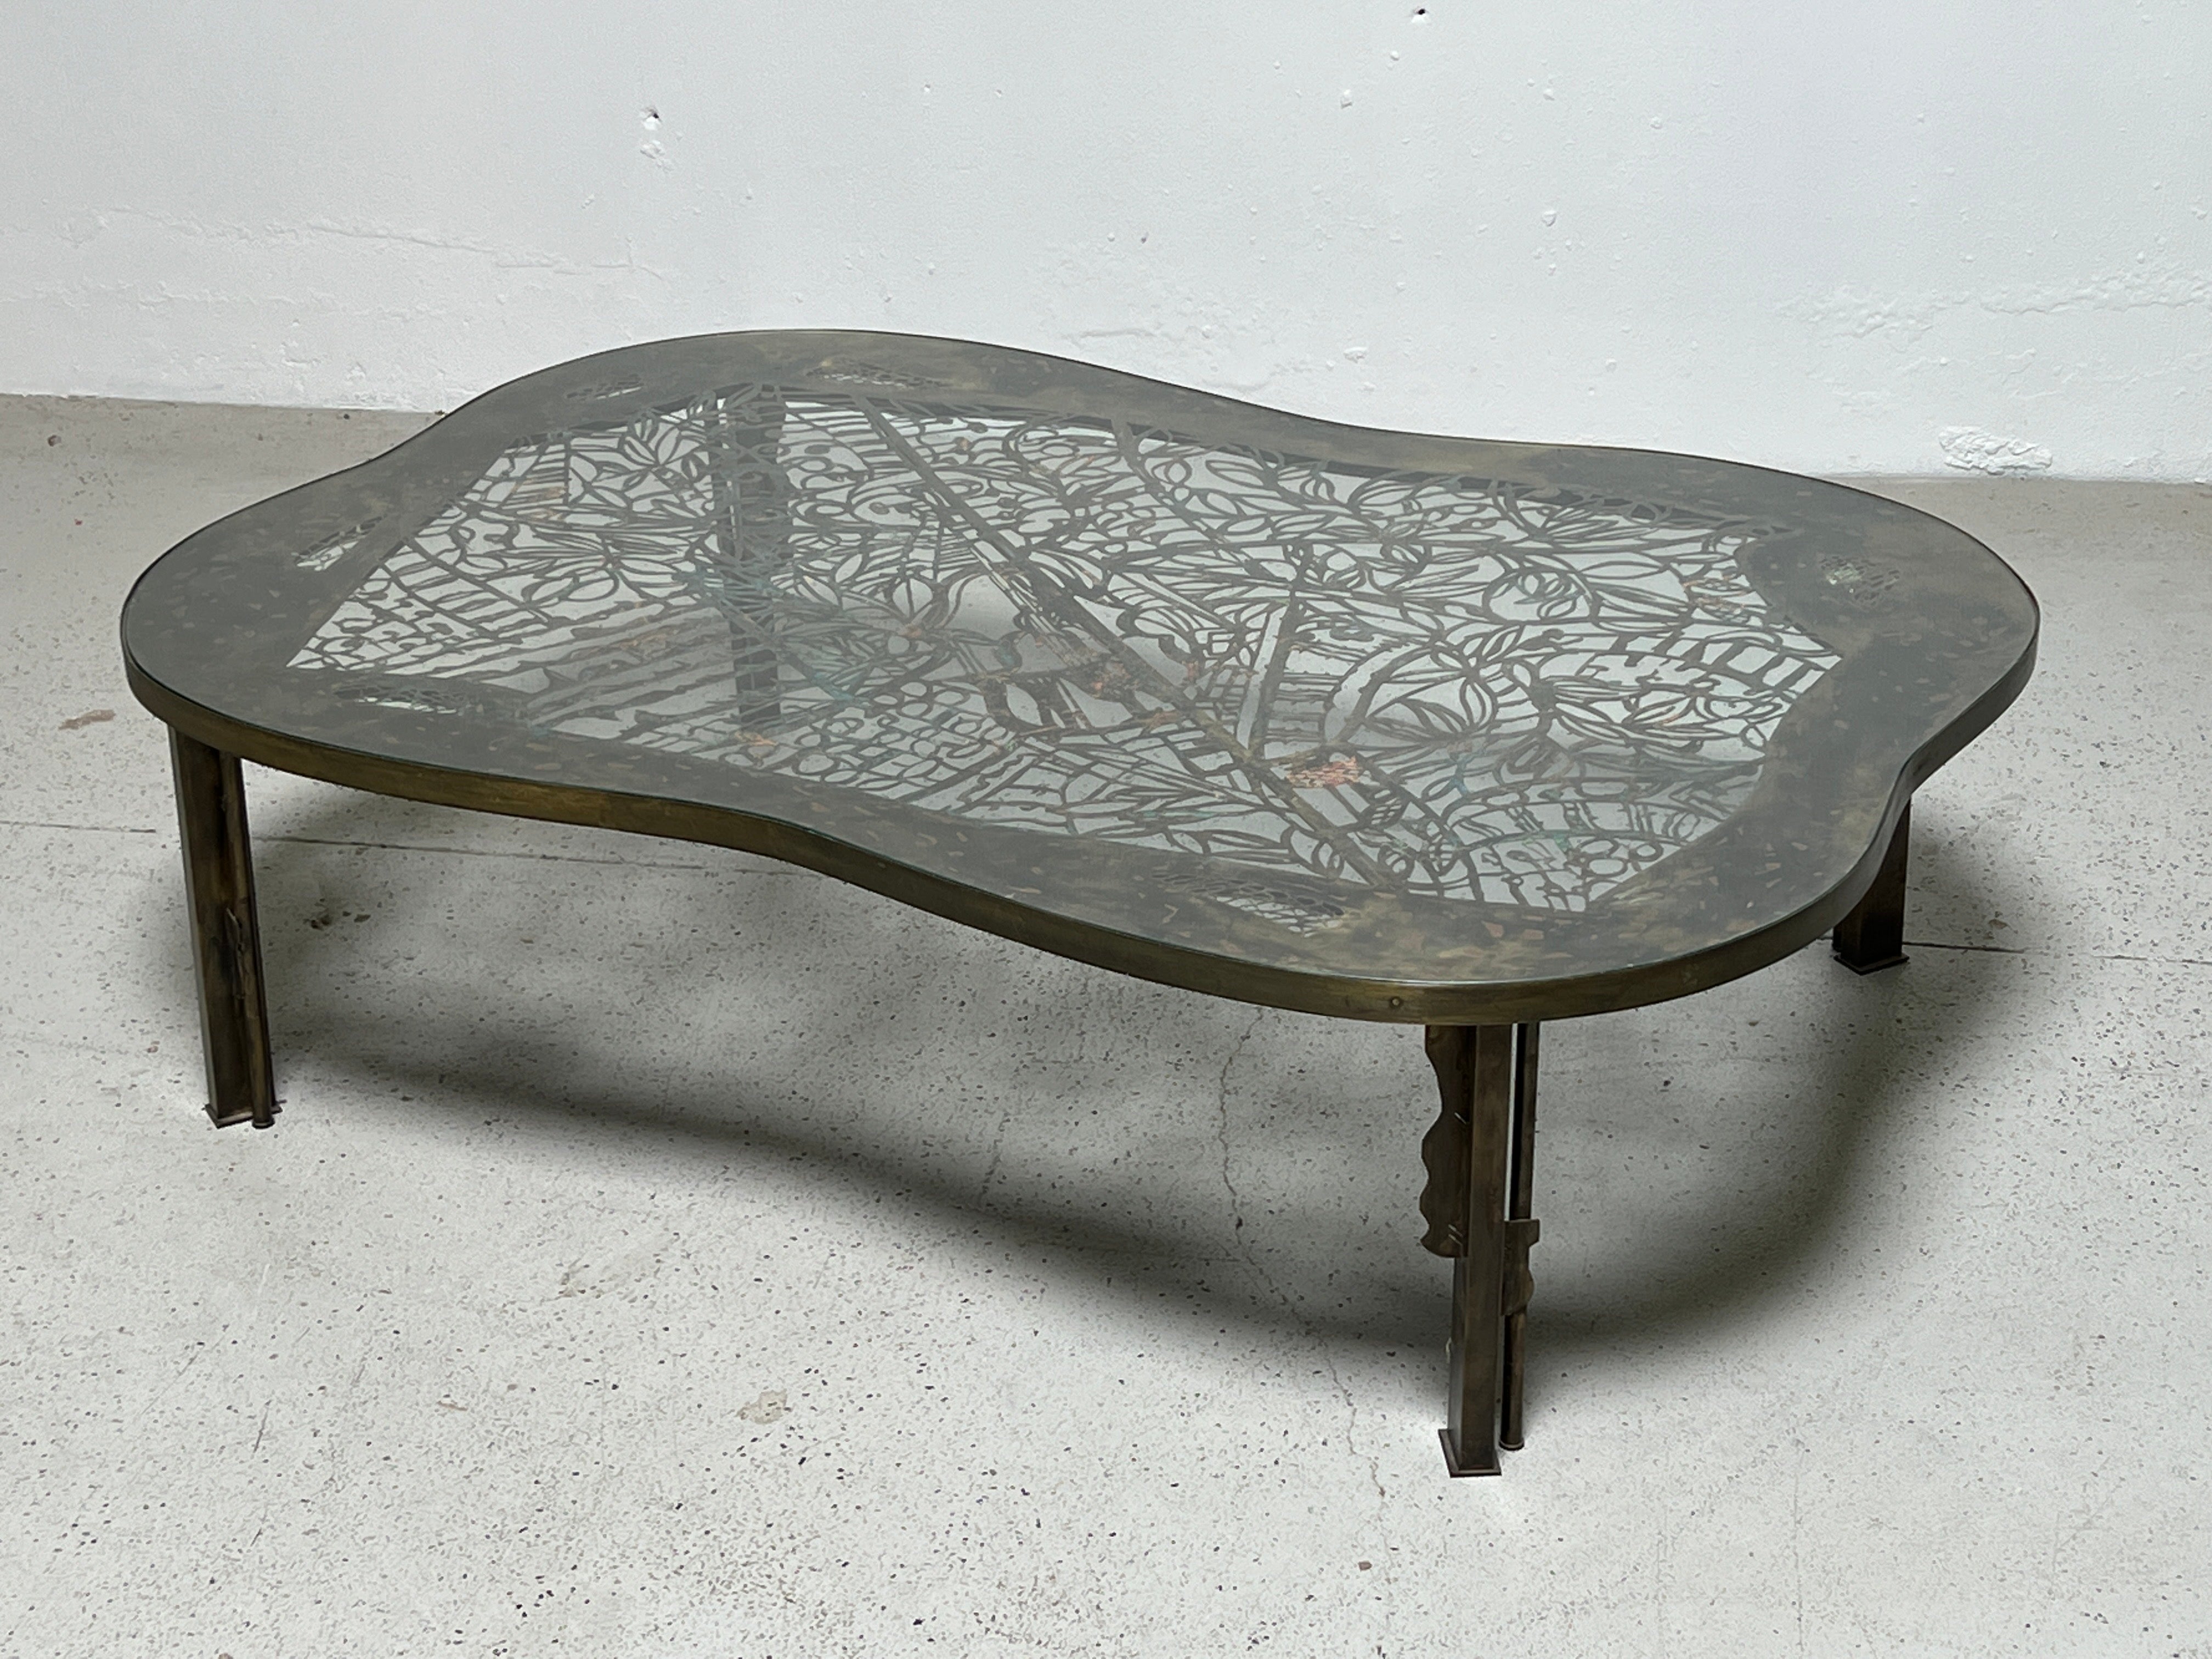 A large and masterful Violau coffee table by Philip and Kelvin Laverne.